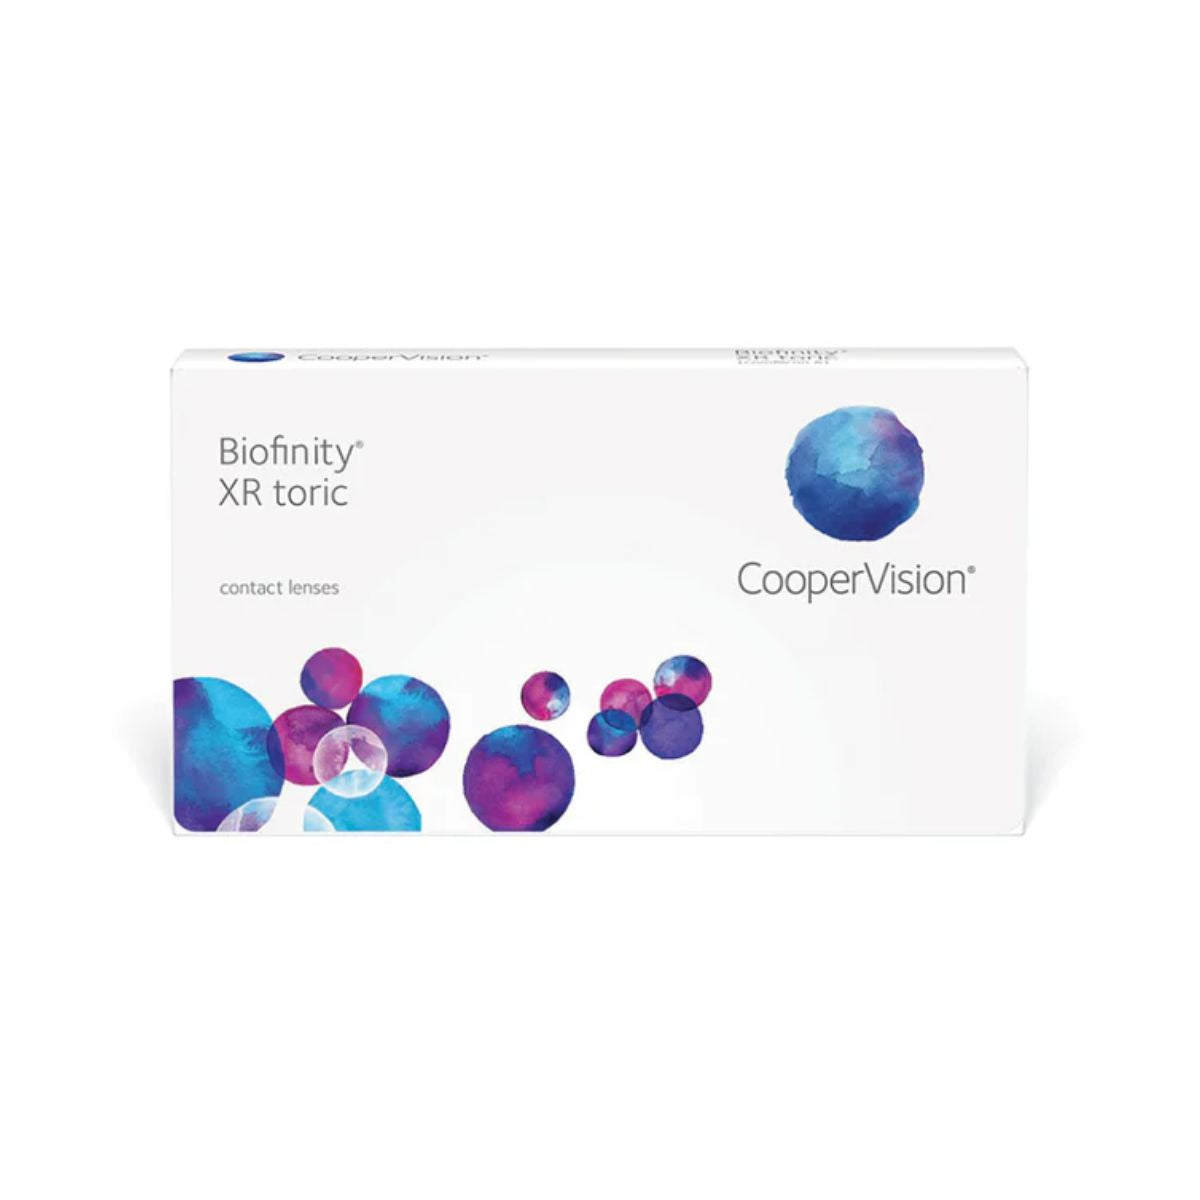 "Buy Biofinity XR Toric Monthly Disposable Contact Lenses - 3 Lens Pack optorium"